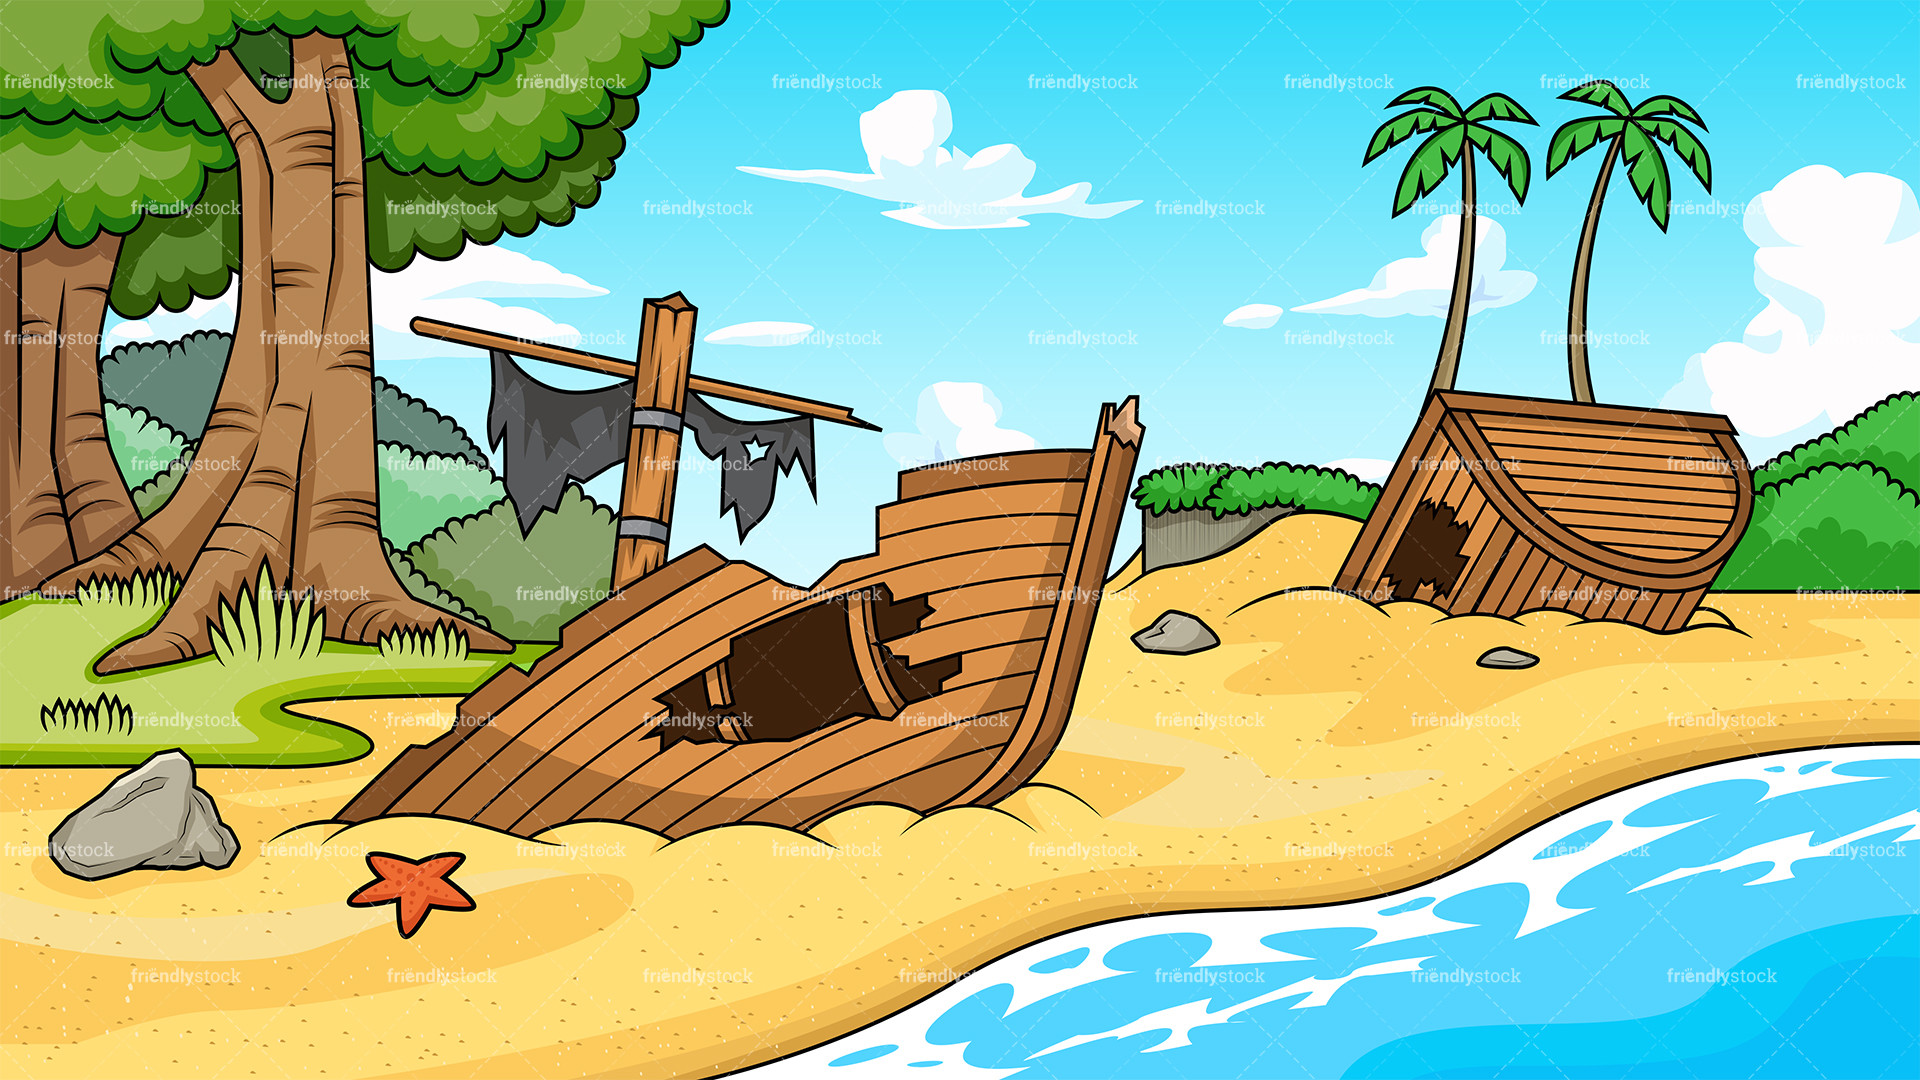 1920x1080 Shipwreck at the beach background in 16:9 aspect ratio. PNG - JPG and